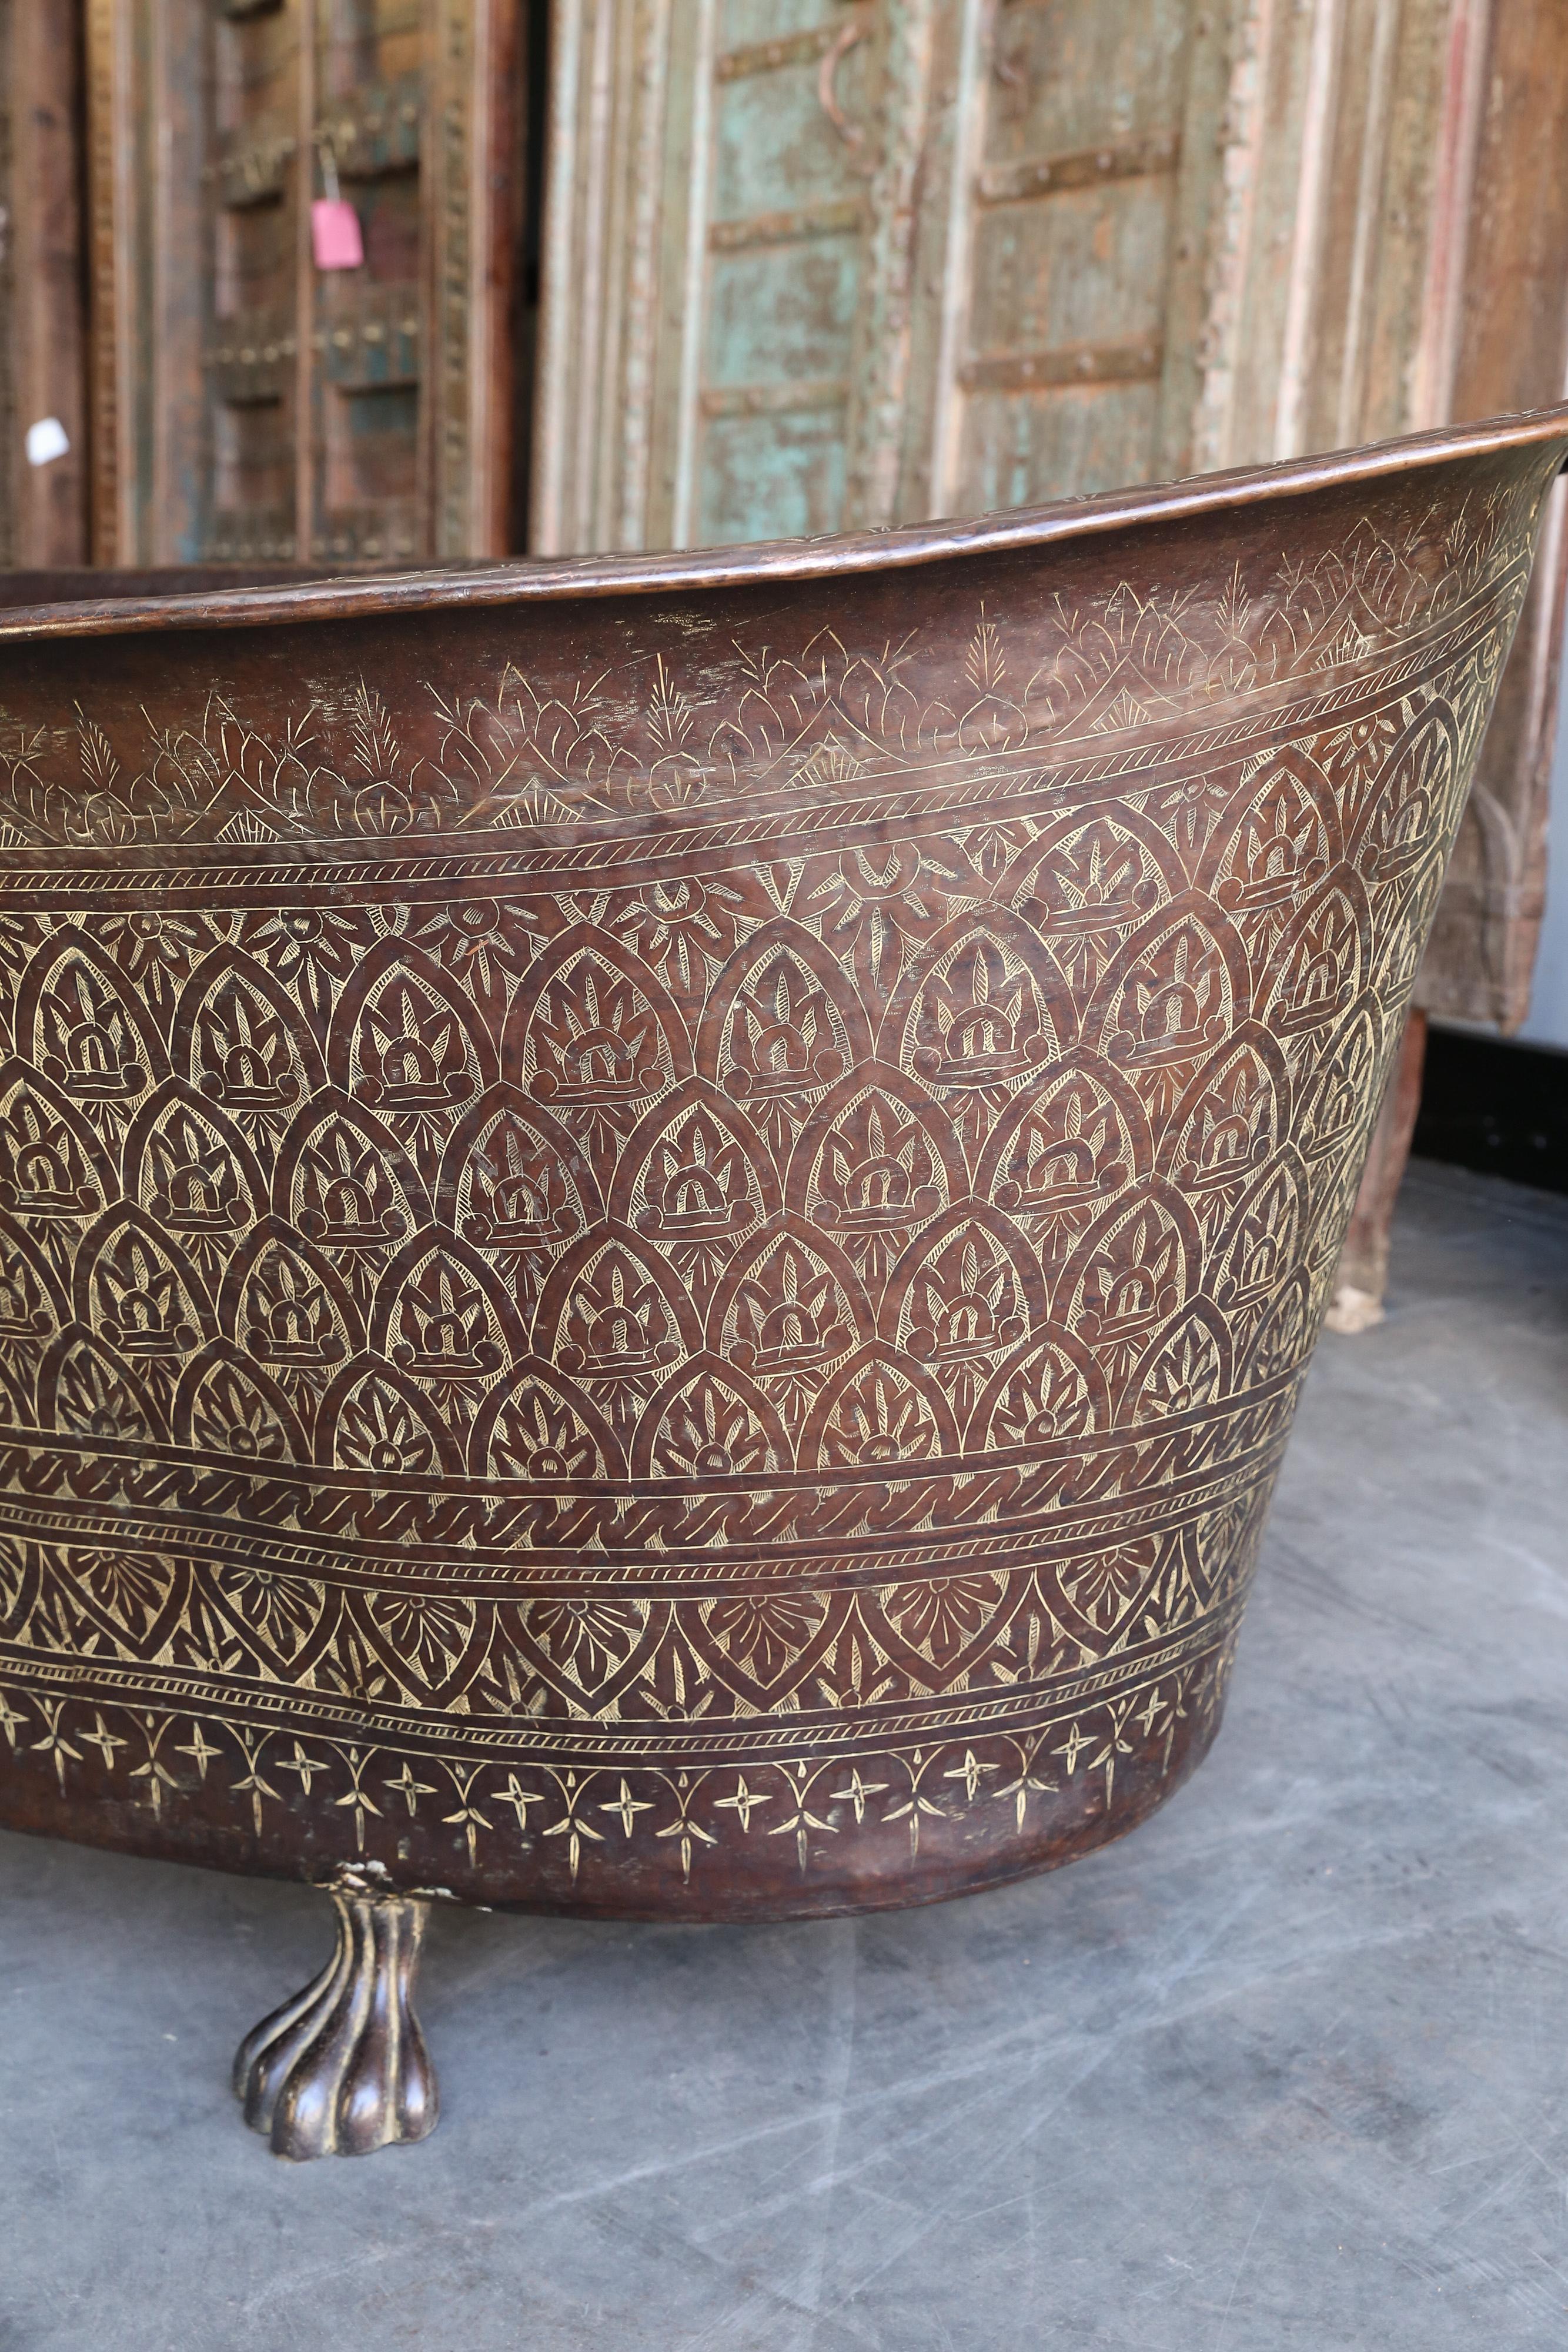 Indian Mid-Century Modern Brass and Copper Alloy Hand Hammered Ornate Bath Tub